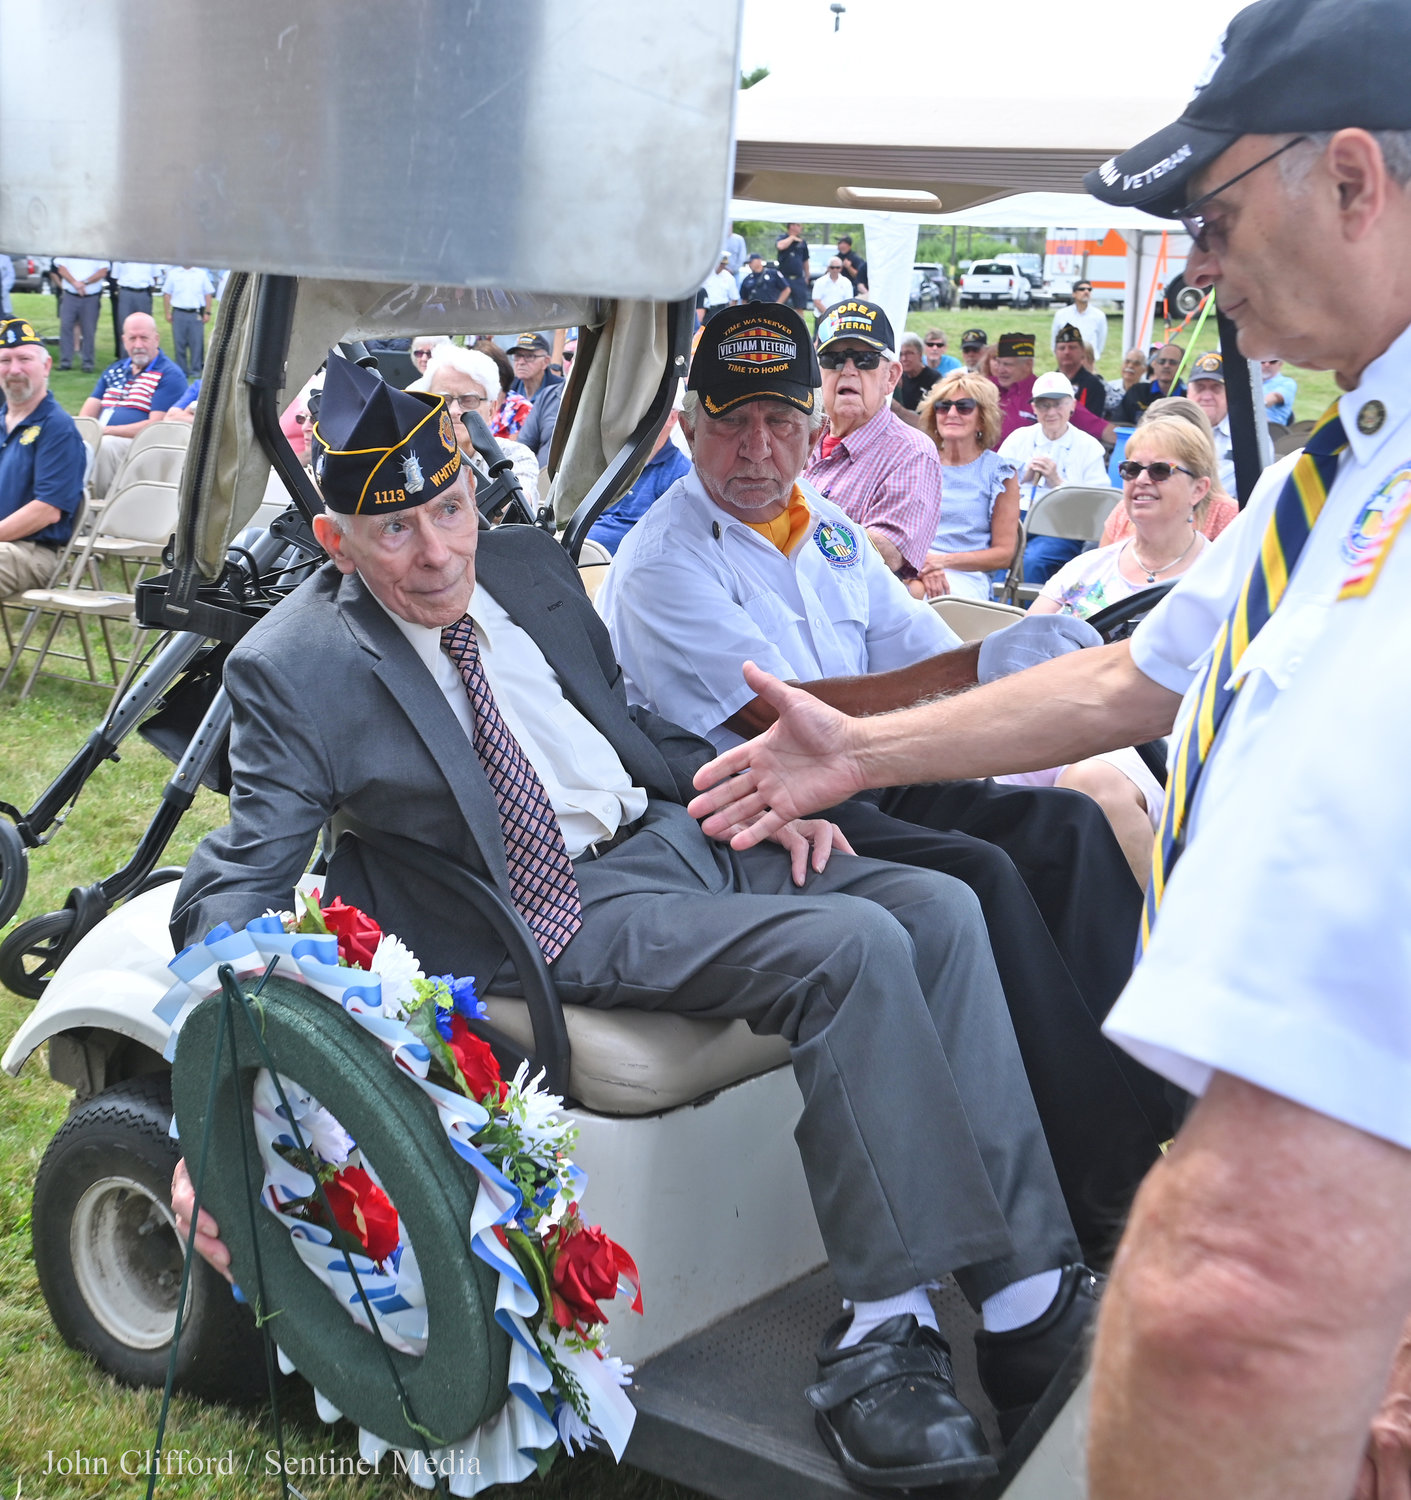 Thomas Buono - president of Vietnam Veterans of America 944 -goes to shake William Goodman's hand after the ceremonial wreath was placed at the new road marker.